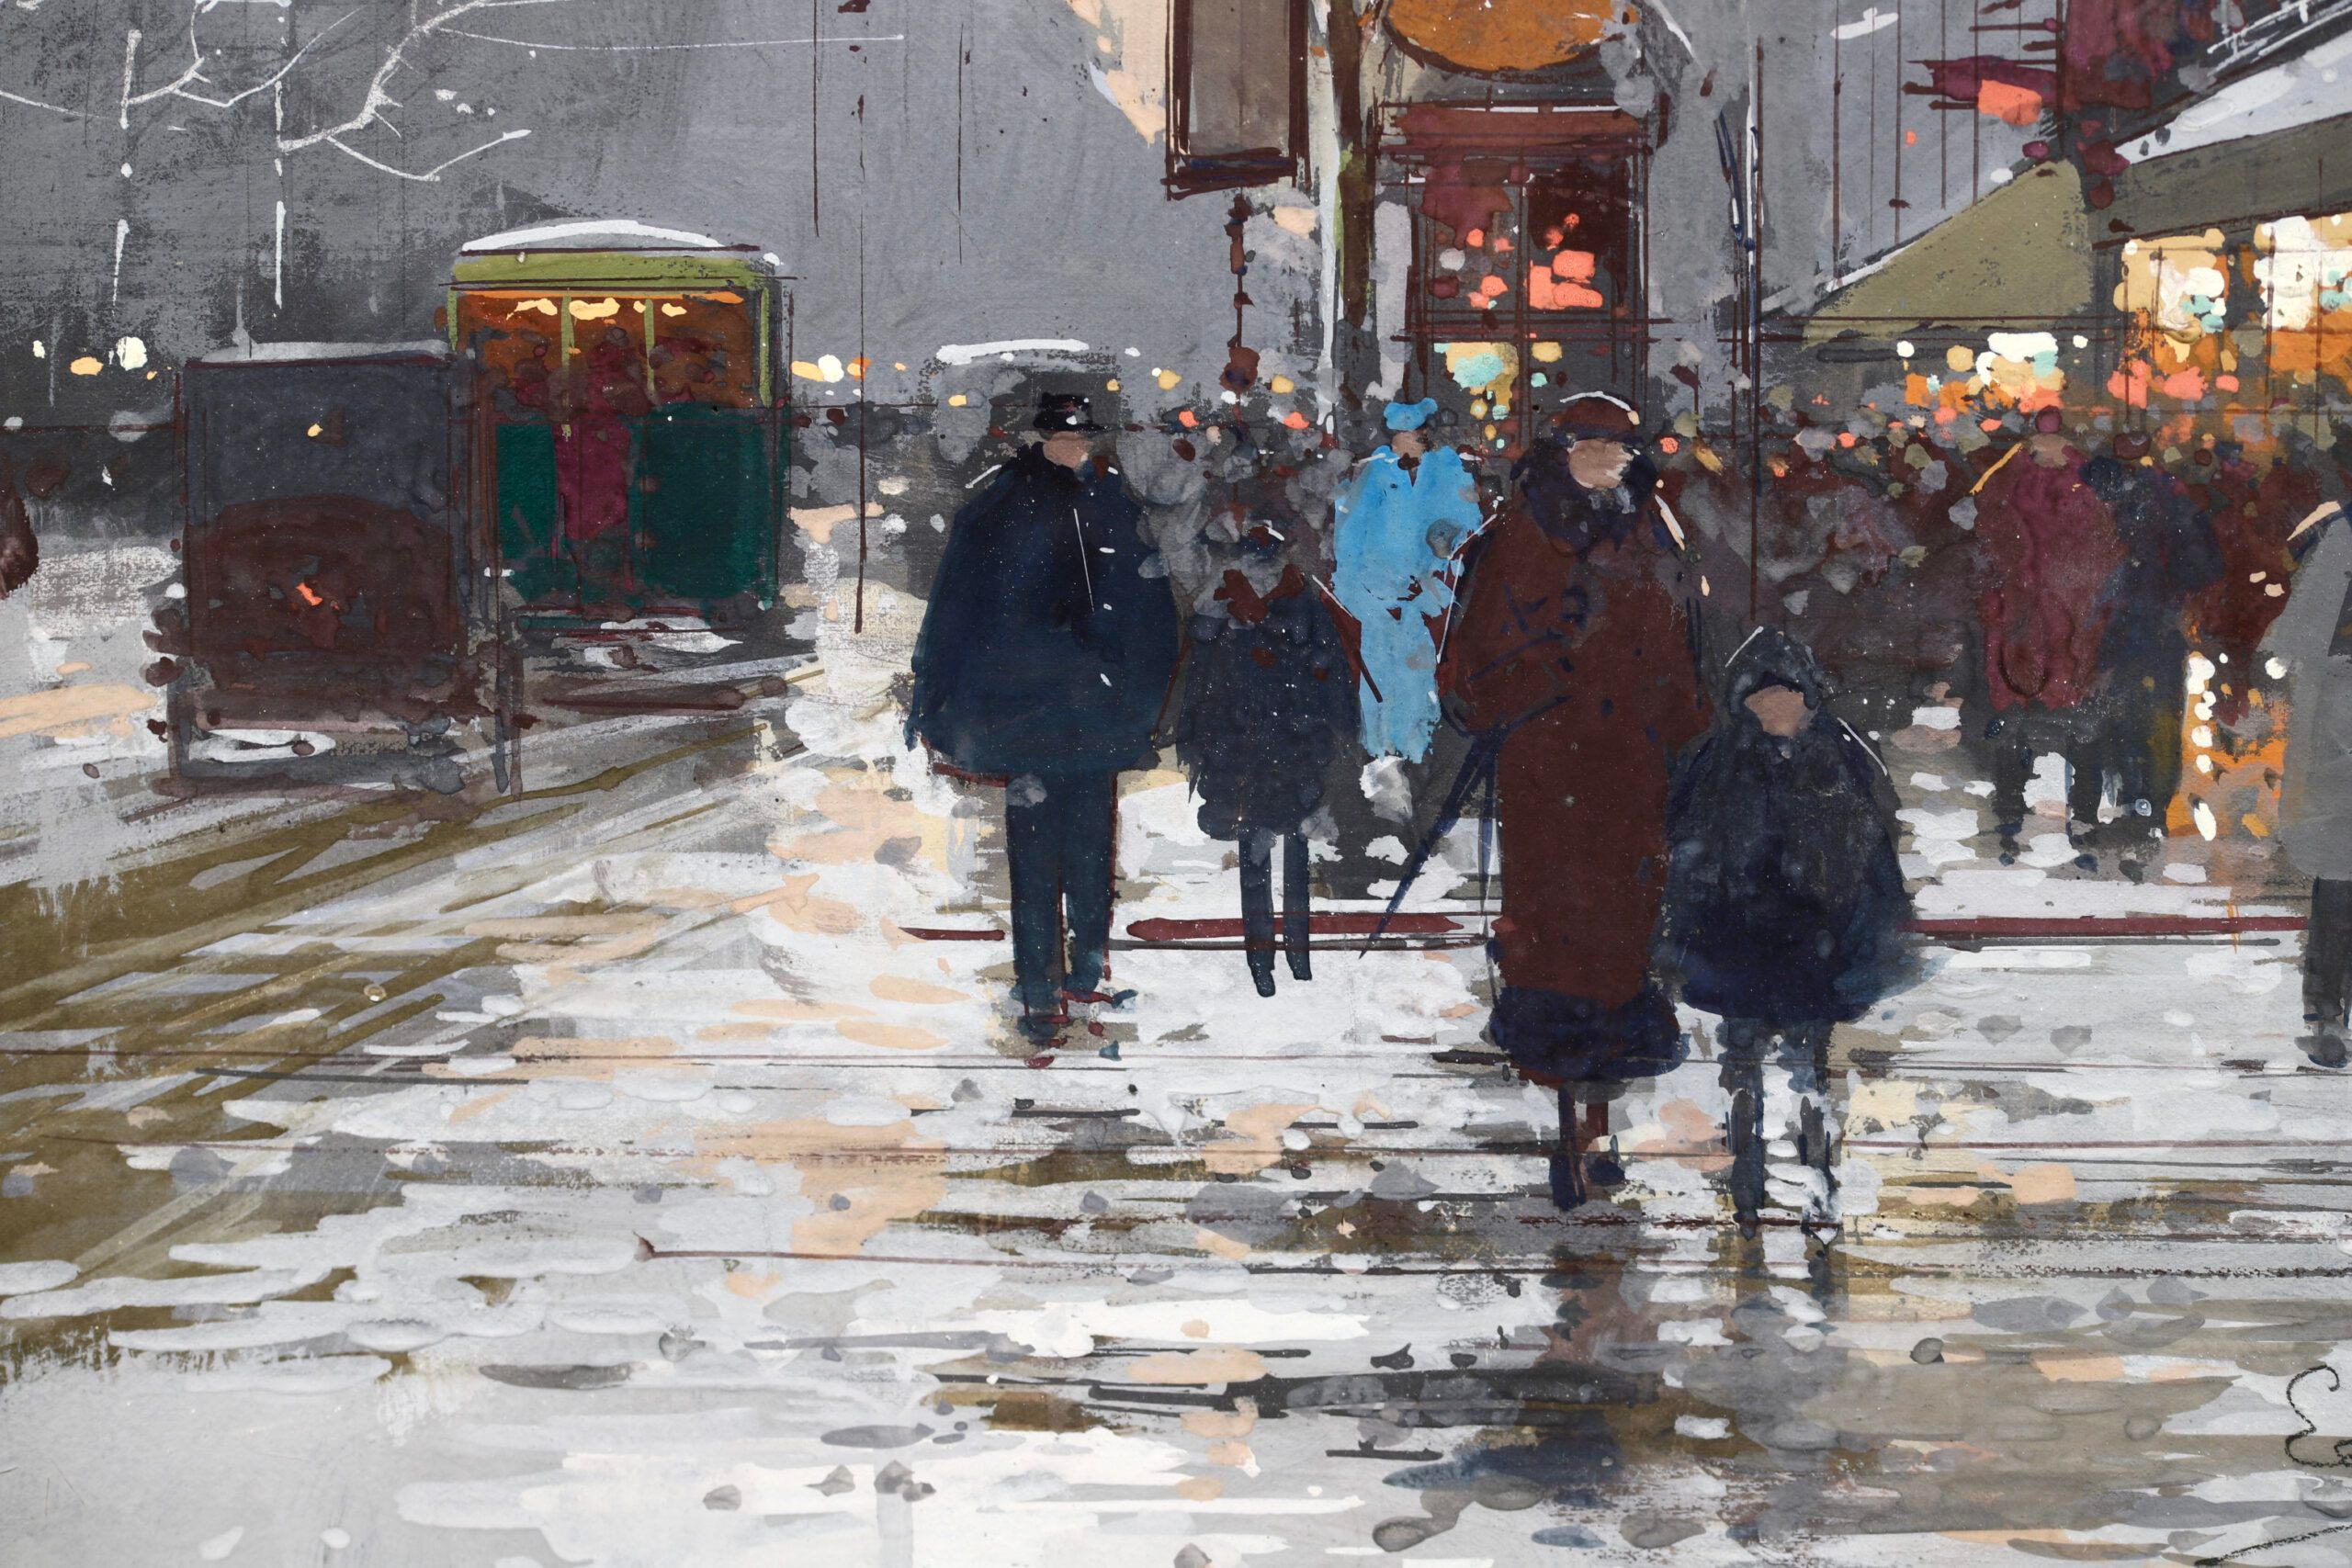 Winter - Porte St Denis - Impressionist Cityscape Painting by Edouard Cortes 7